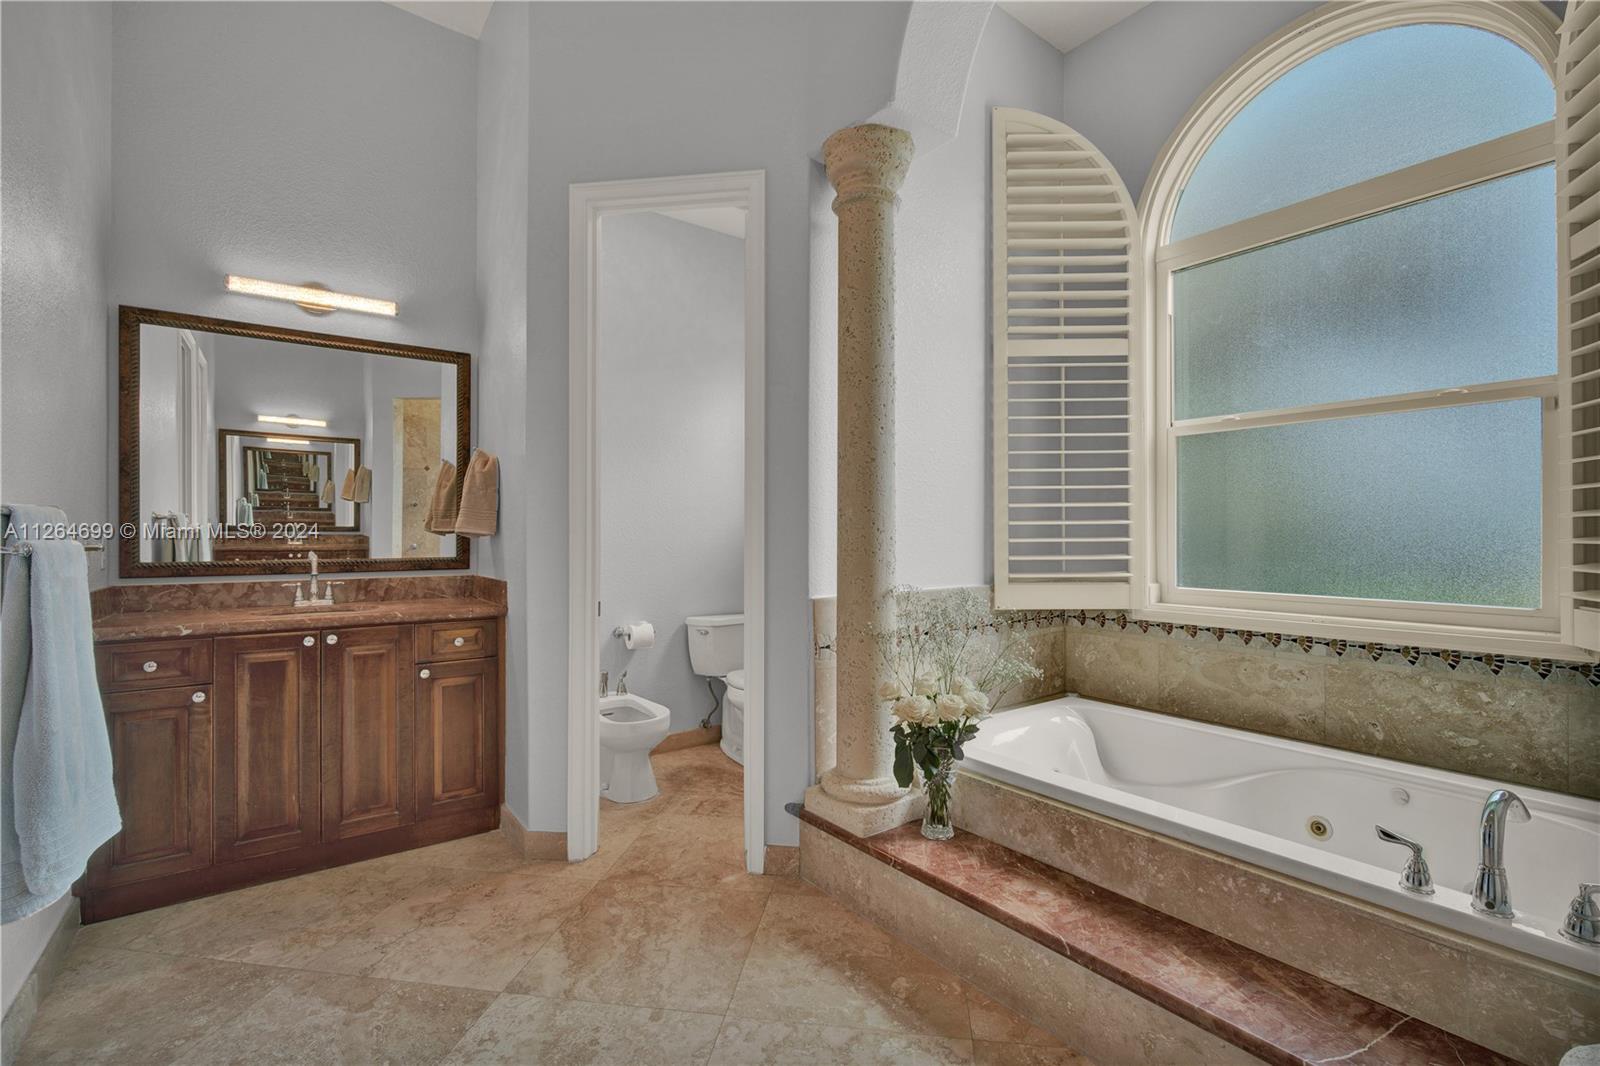 Master Bathroom & Take Your Time to Relax!